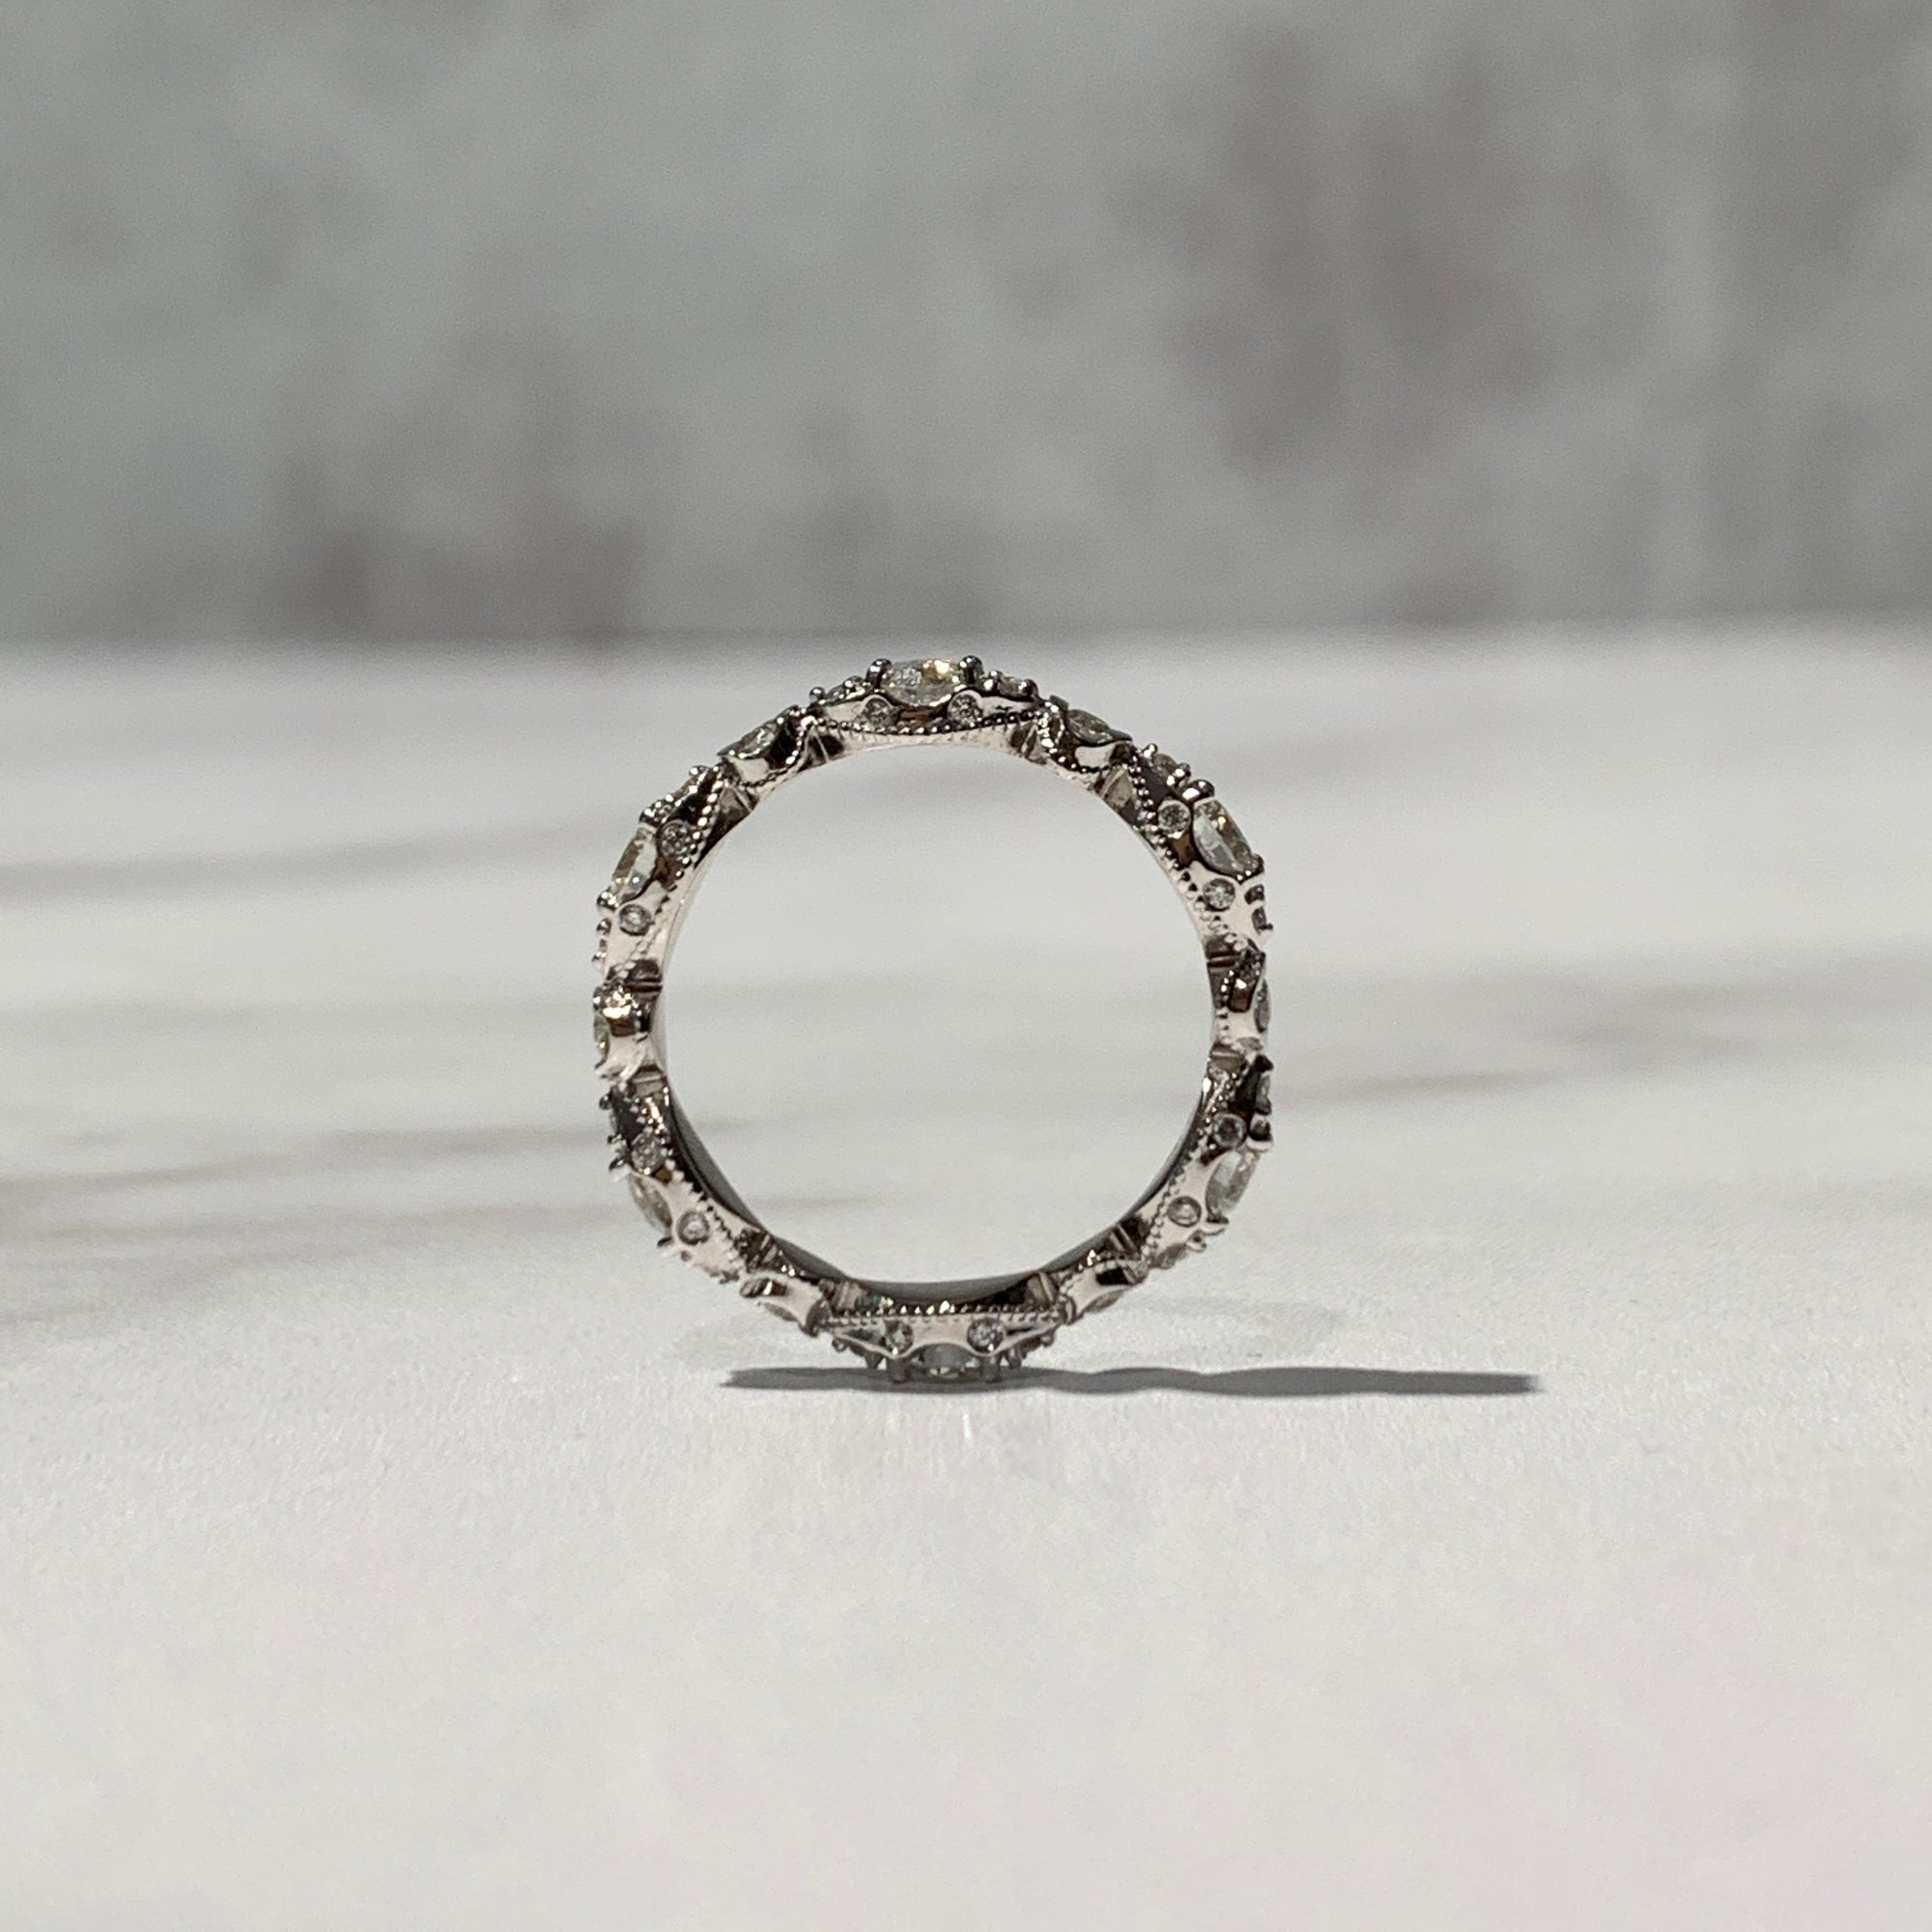 Vintage inspired eternity wedding band with beading and scrollwork